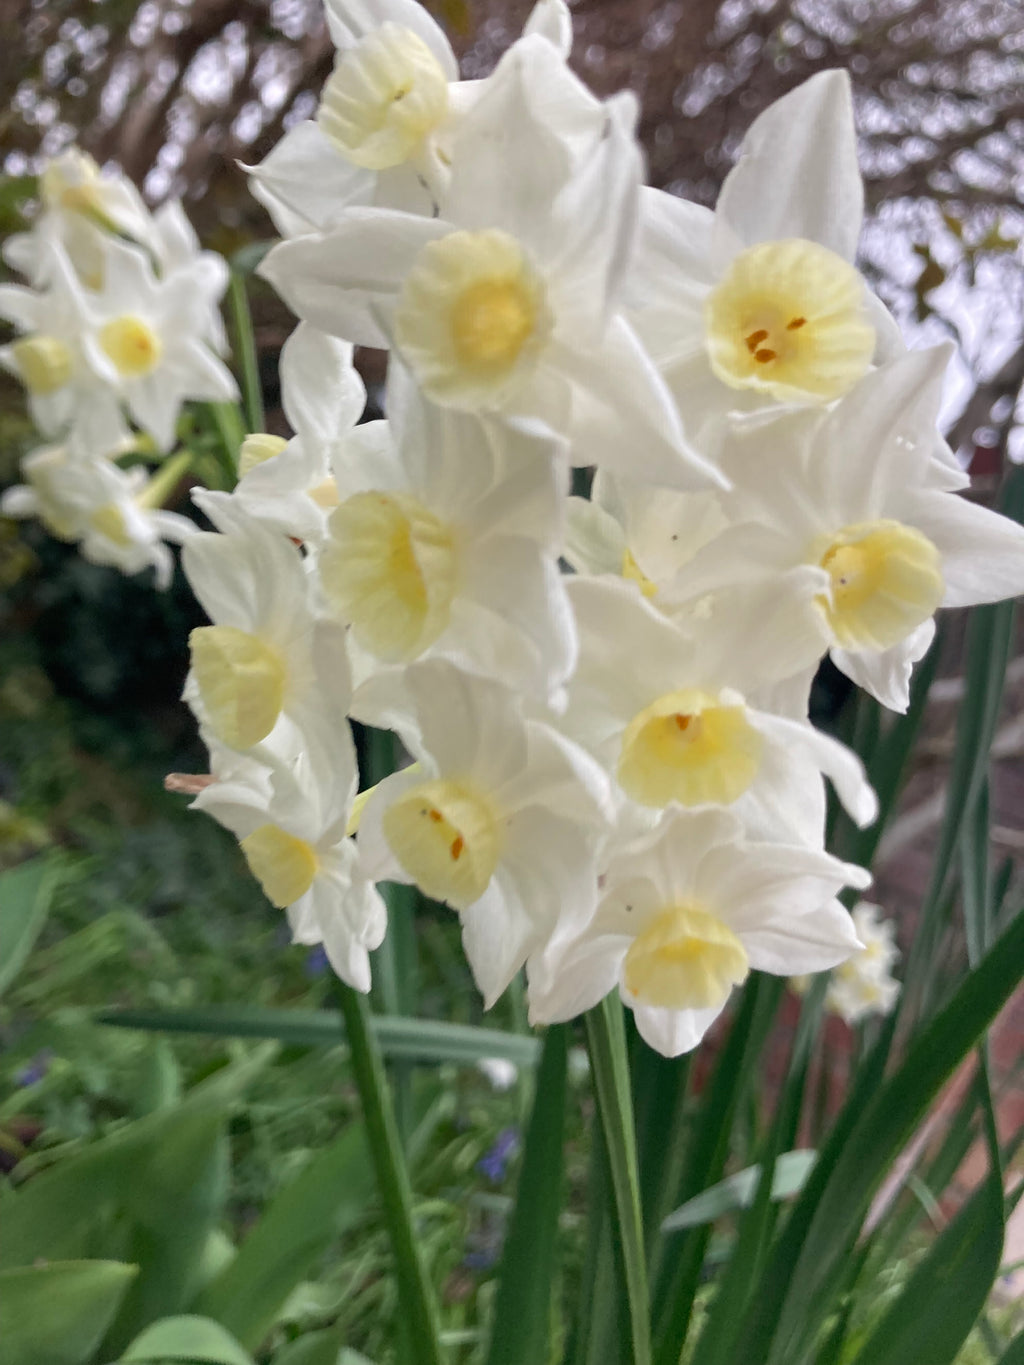 Daffodil 'Paperwhite' Bulbs (Narcissus) Free UK Postage